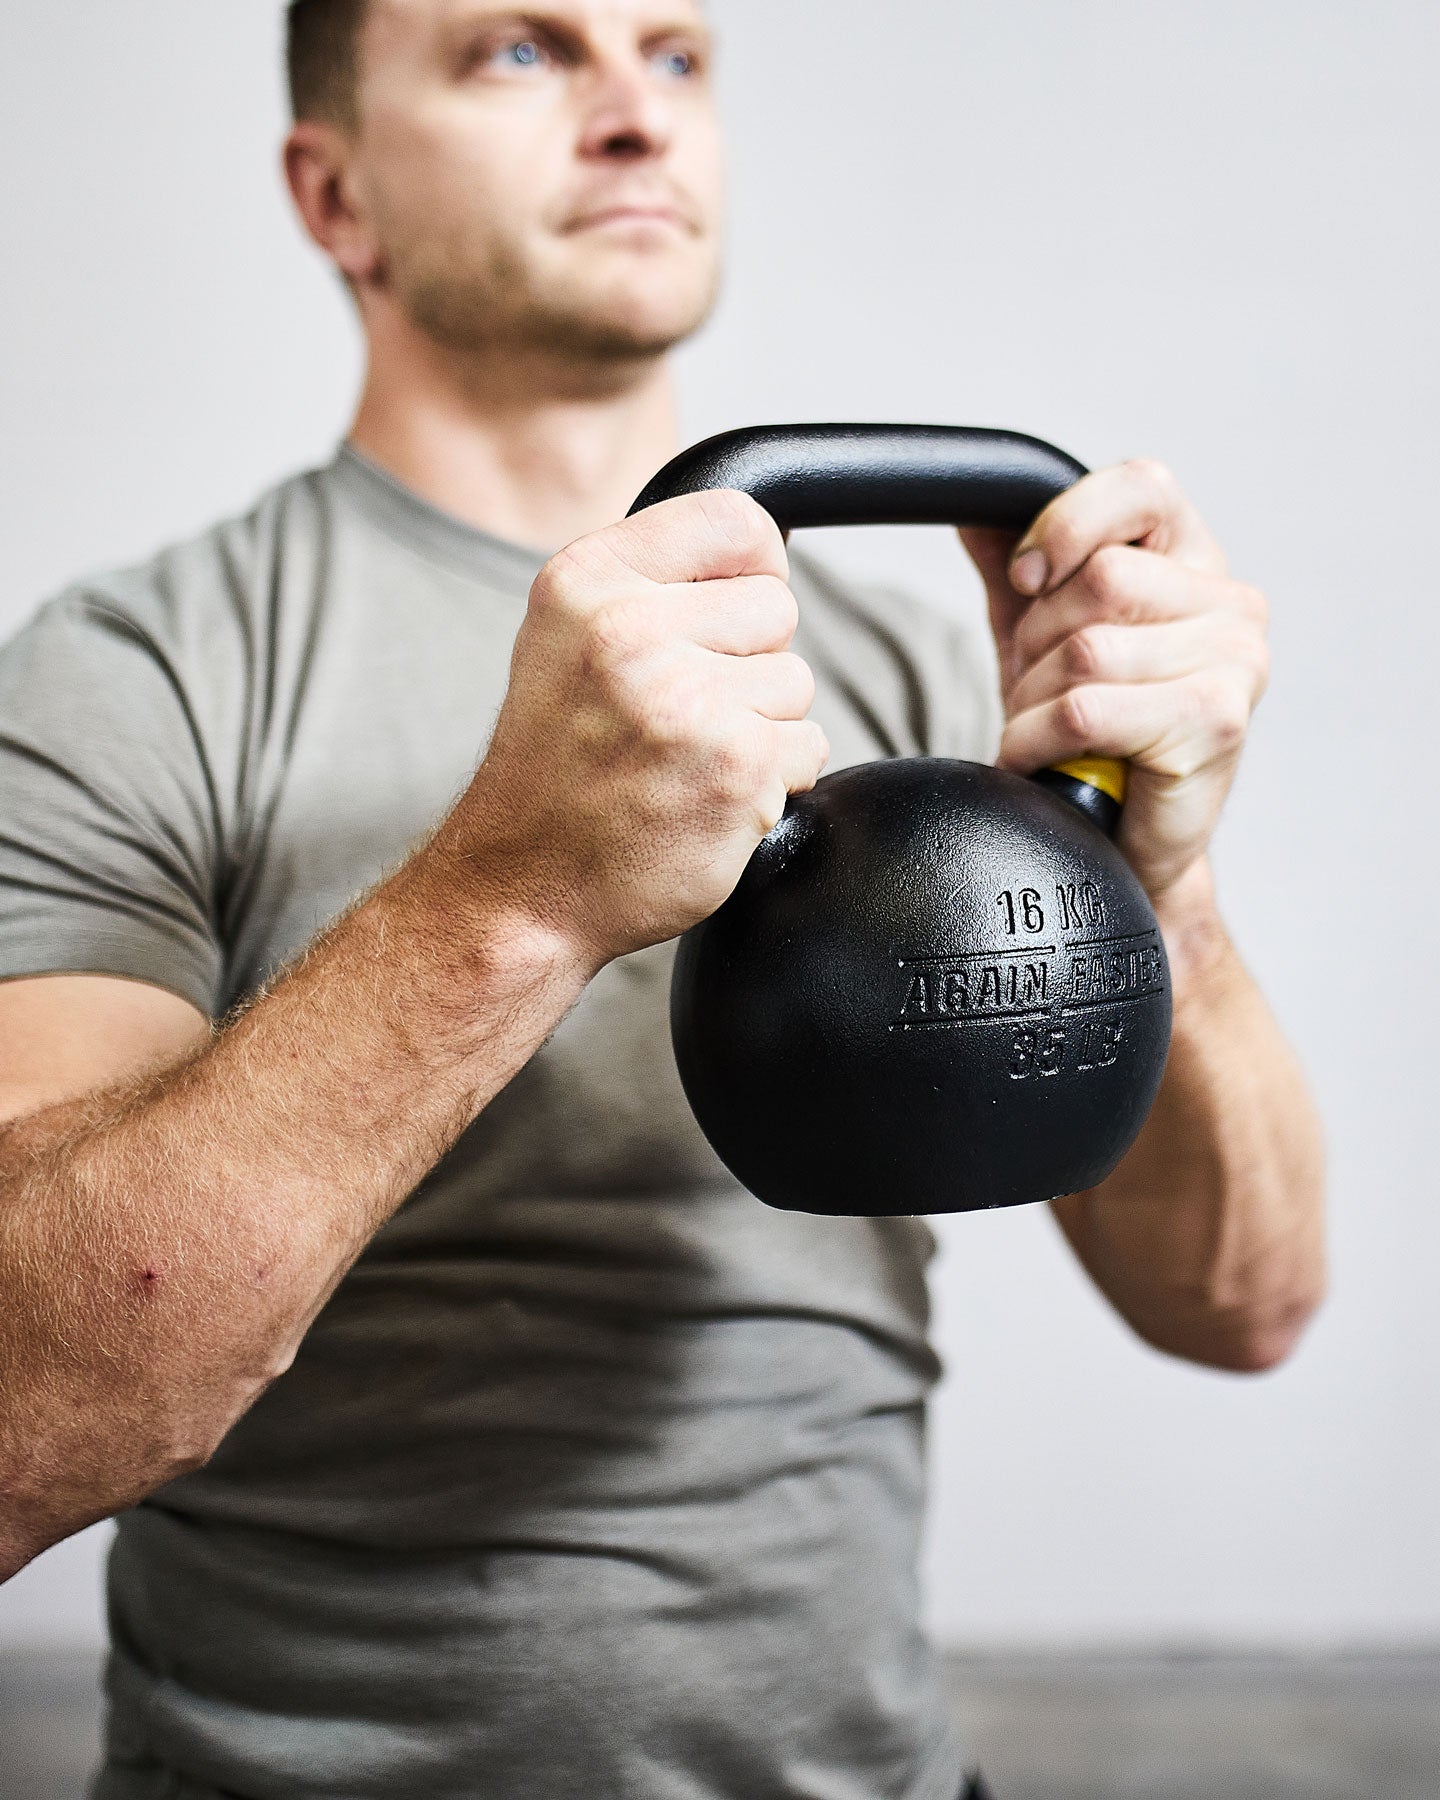 Kettlebell Weight: How to Choose the Right Load